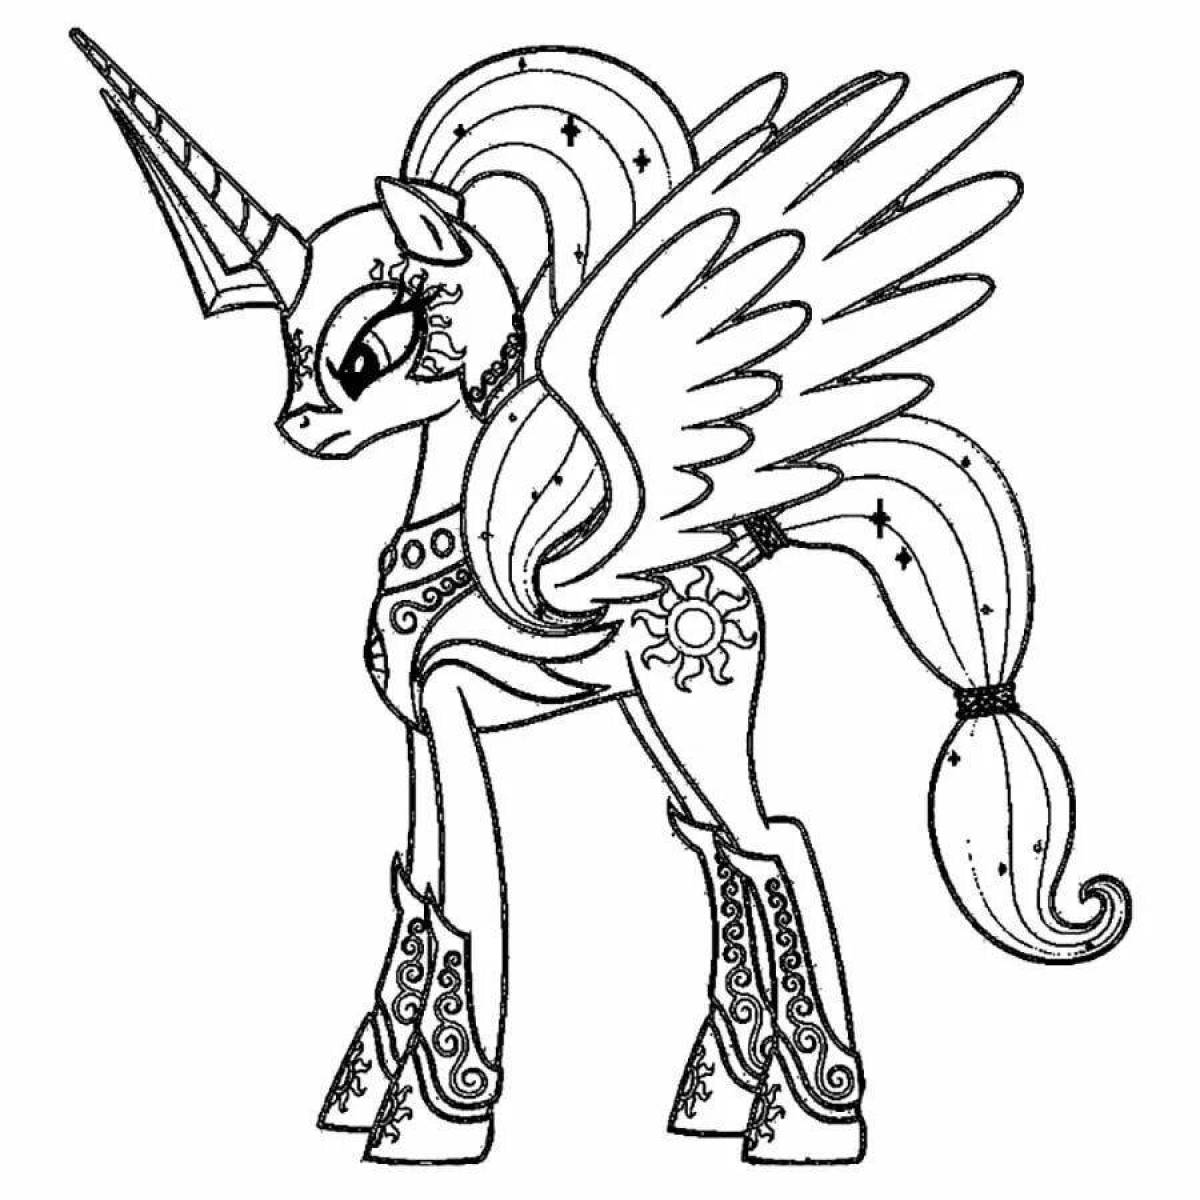 Violent pony coloring with wings